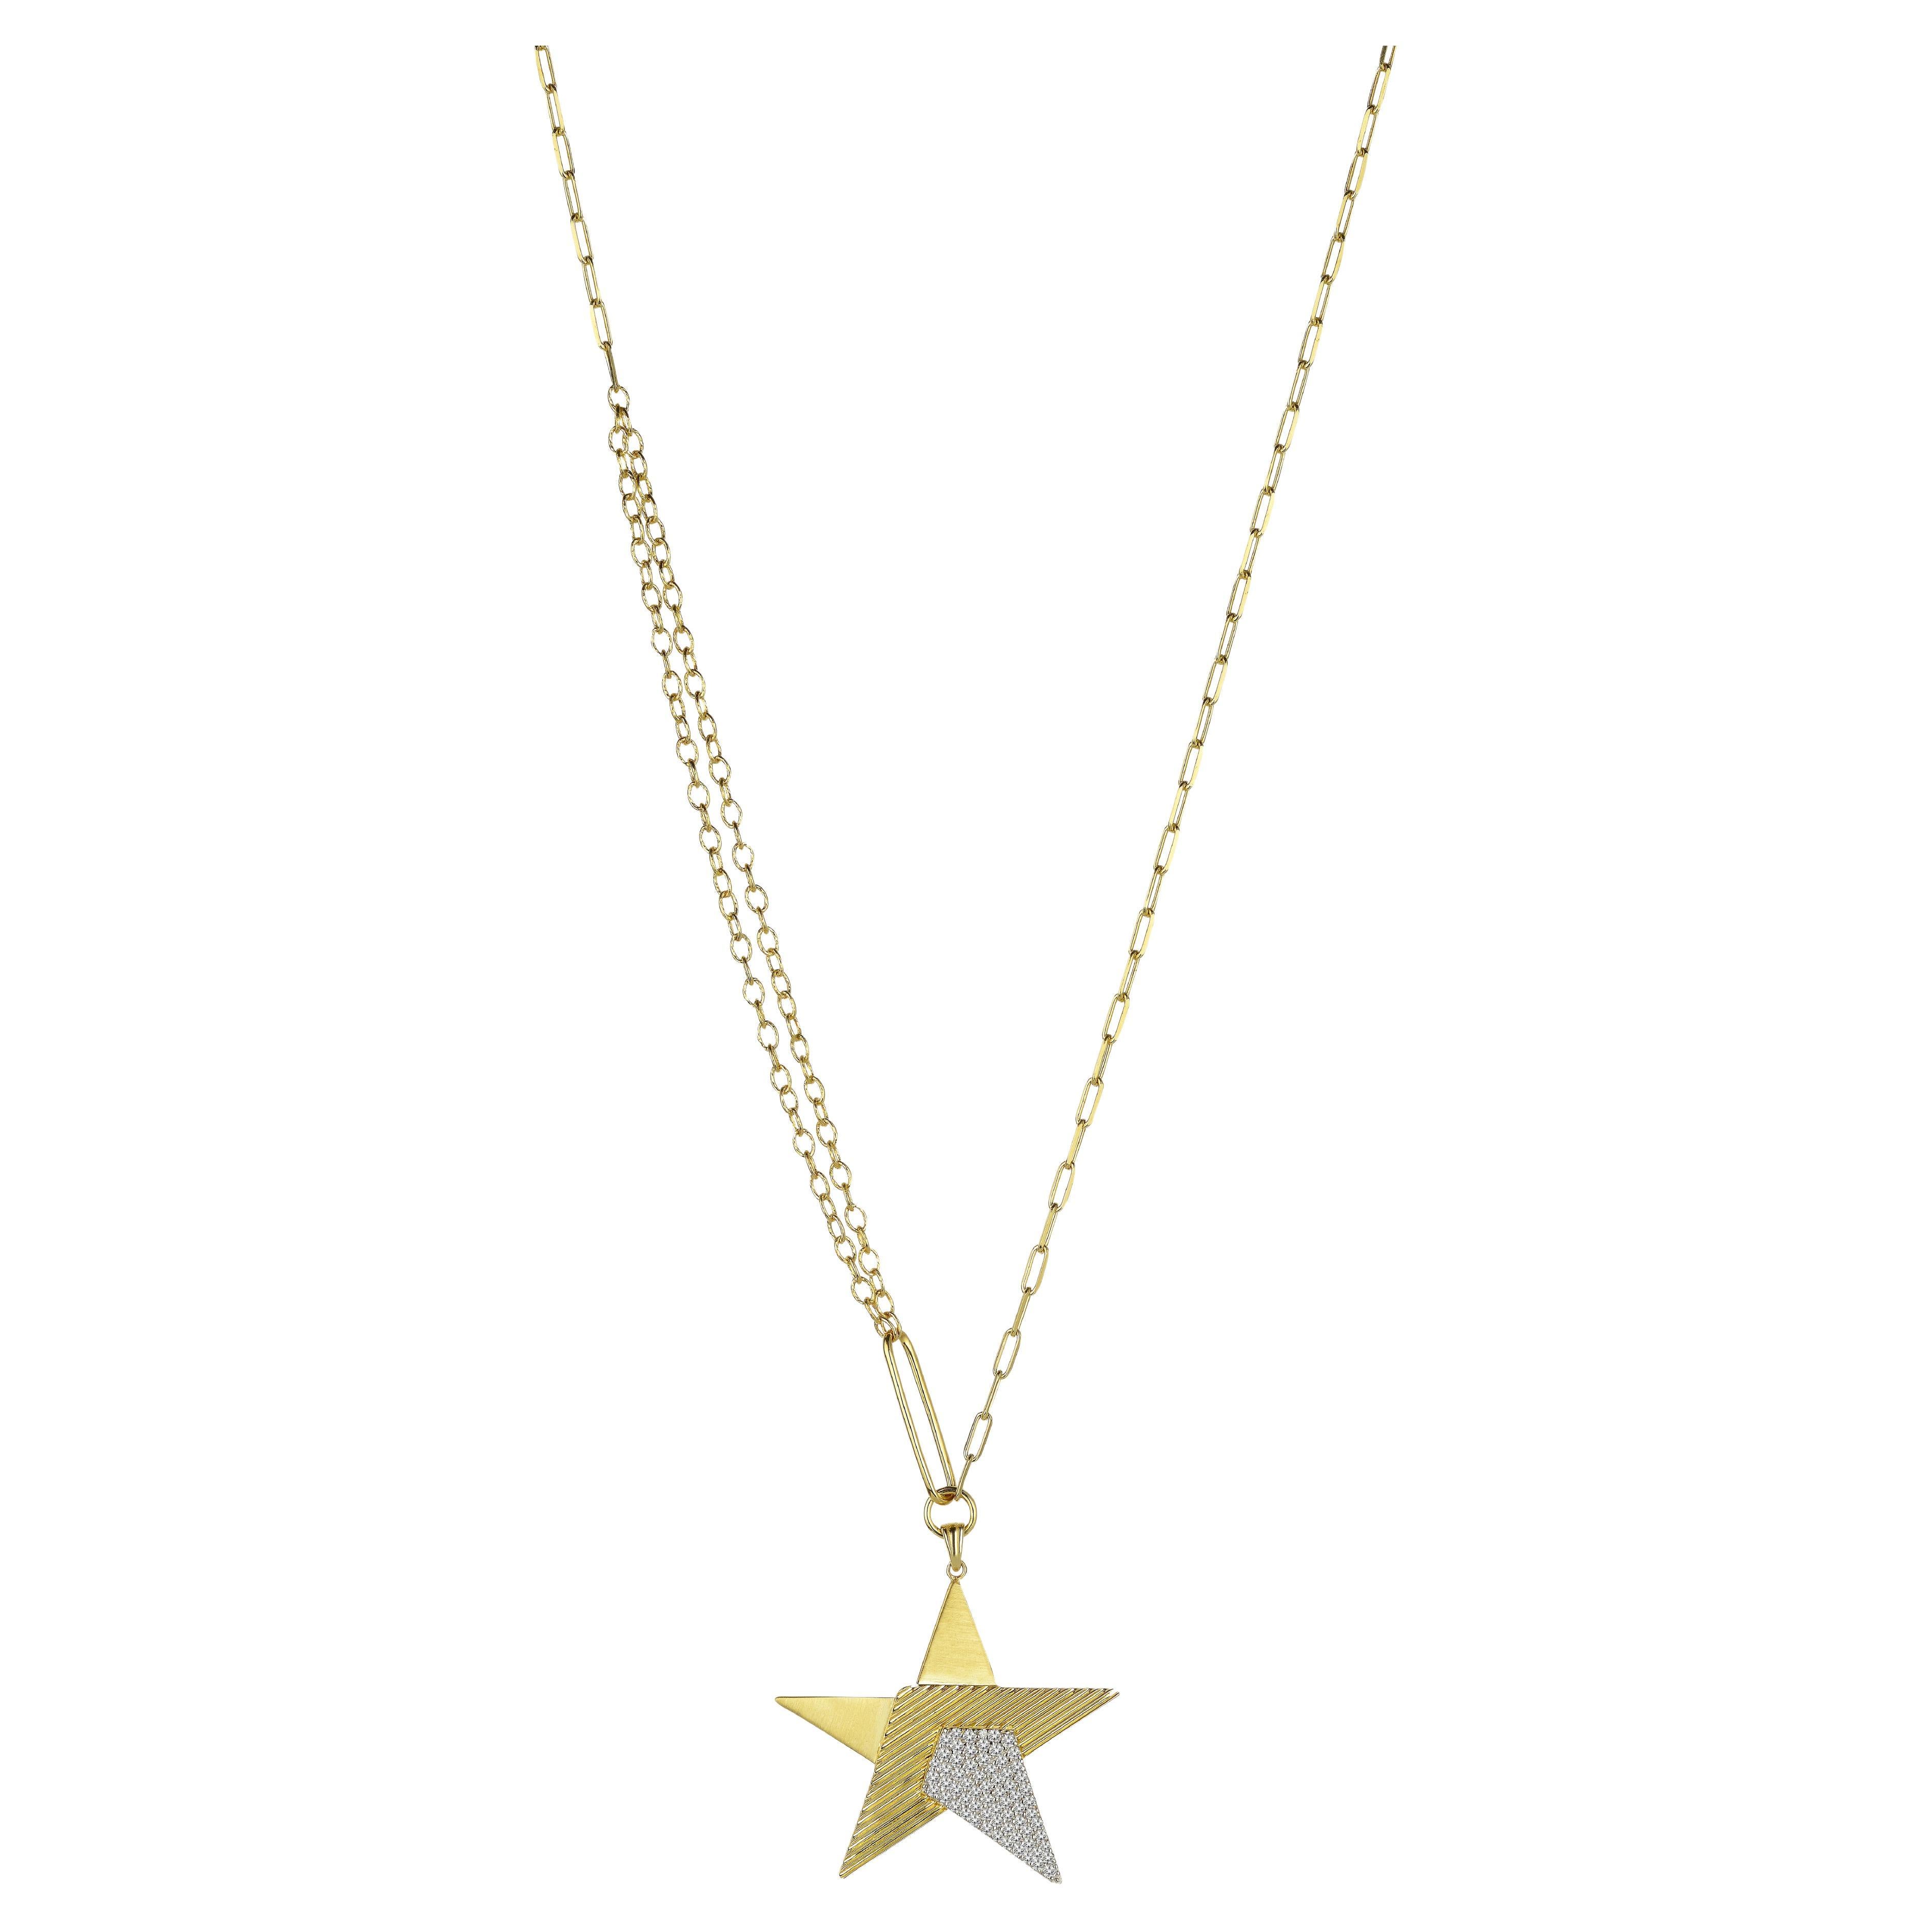 14K Yellow Gold Galactic Bold Star Necklace with Diamonds